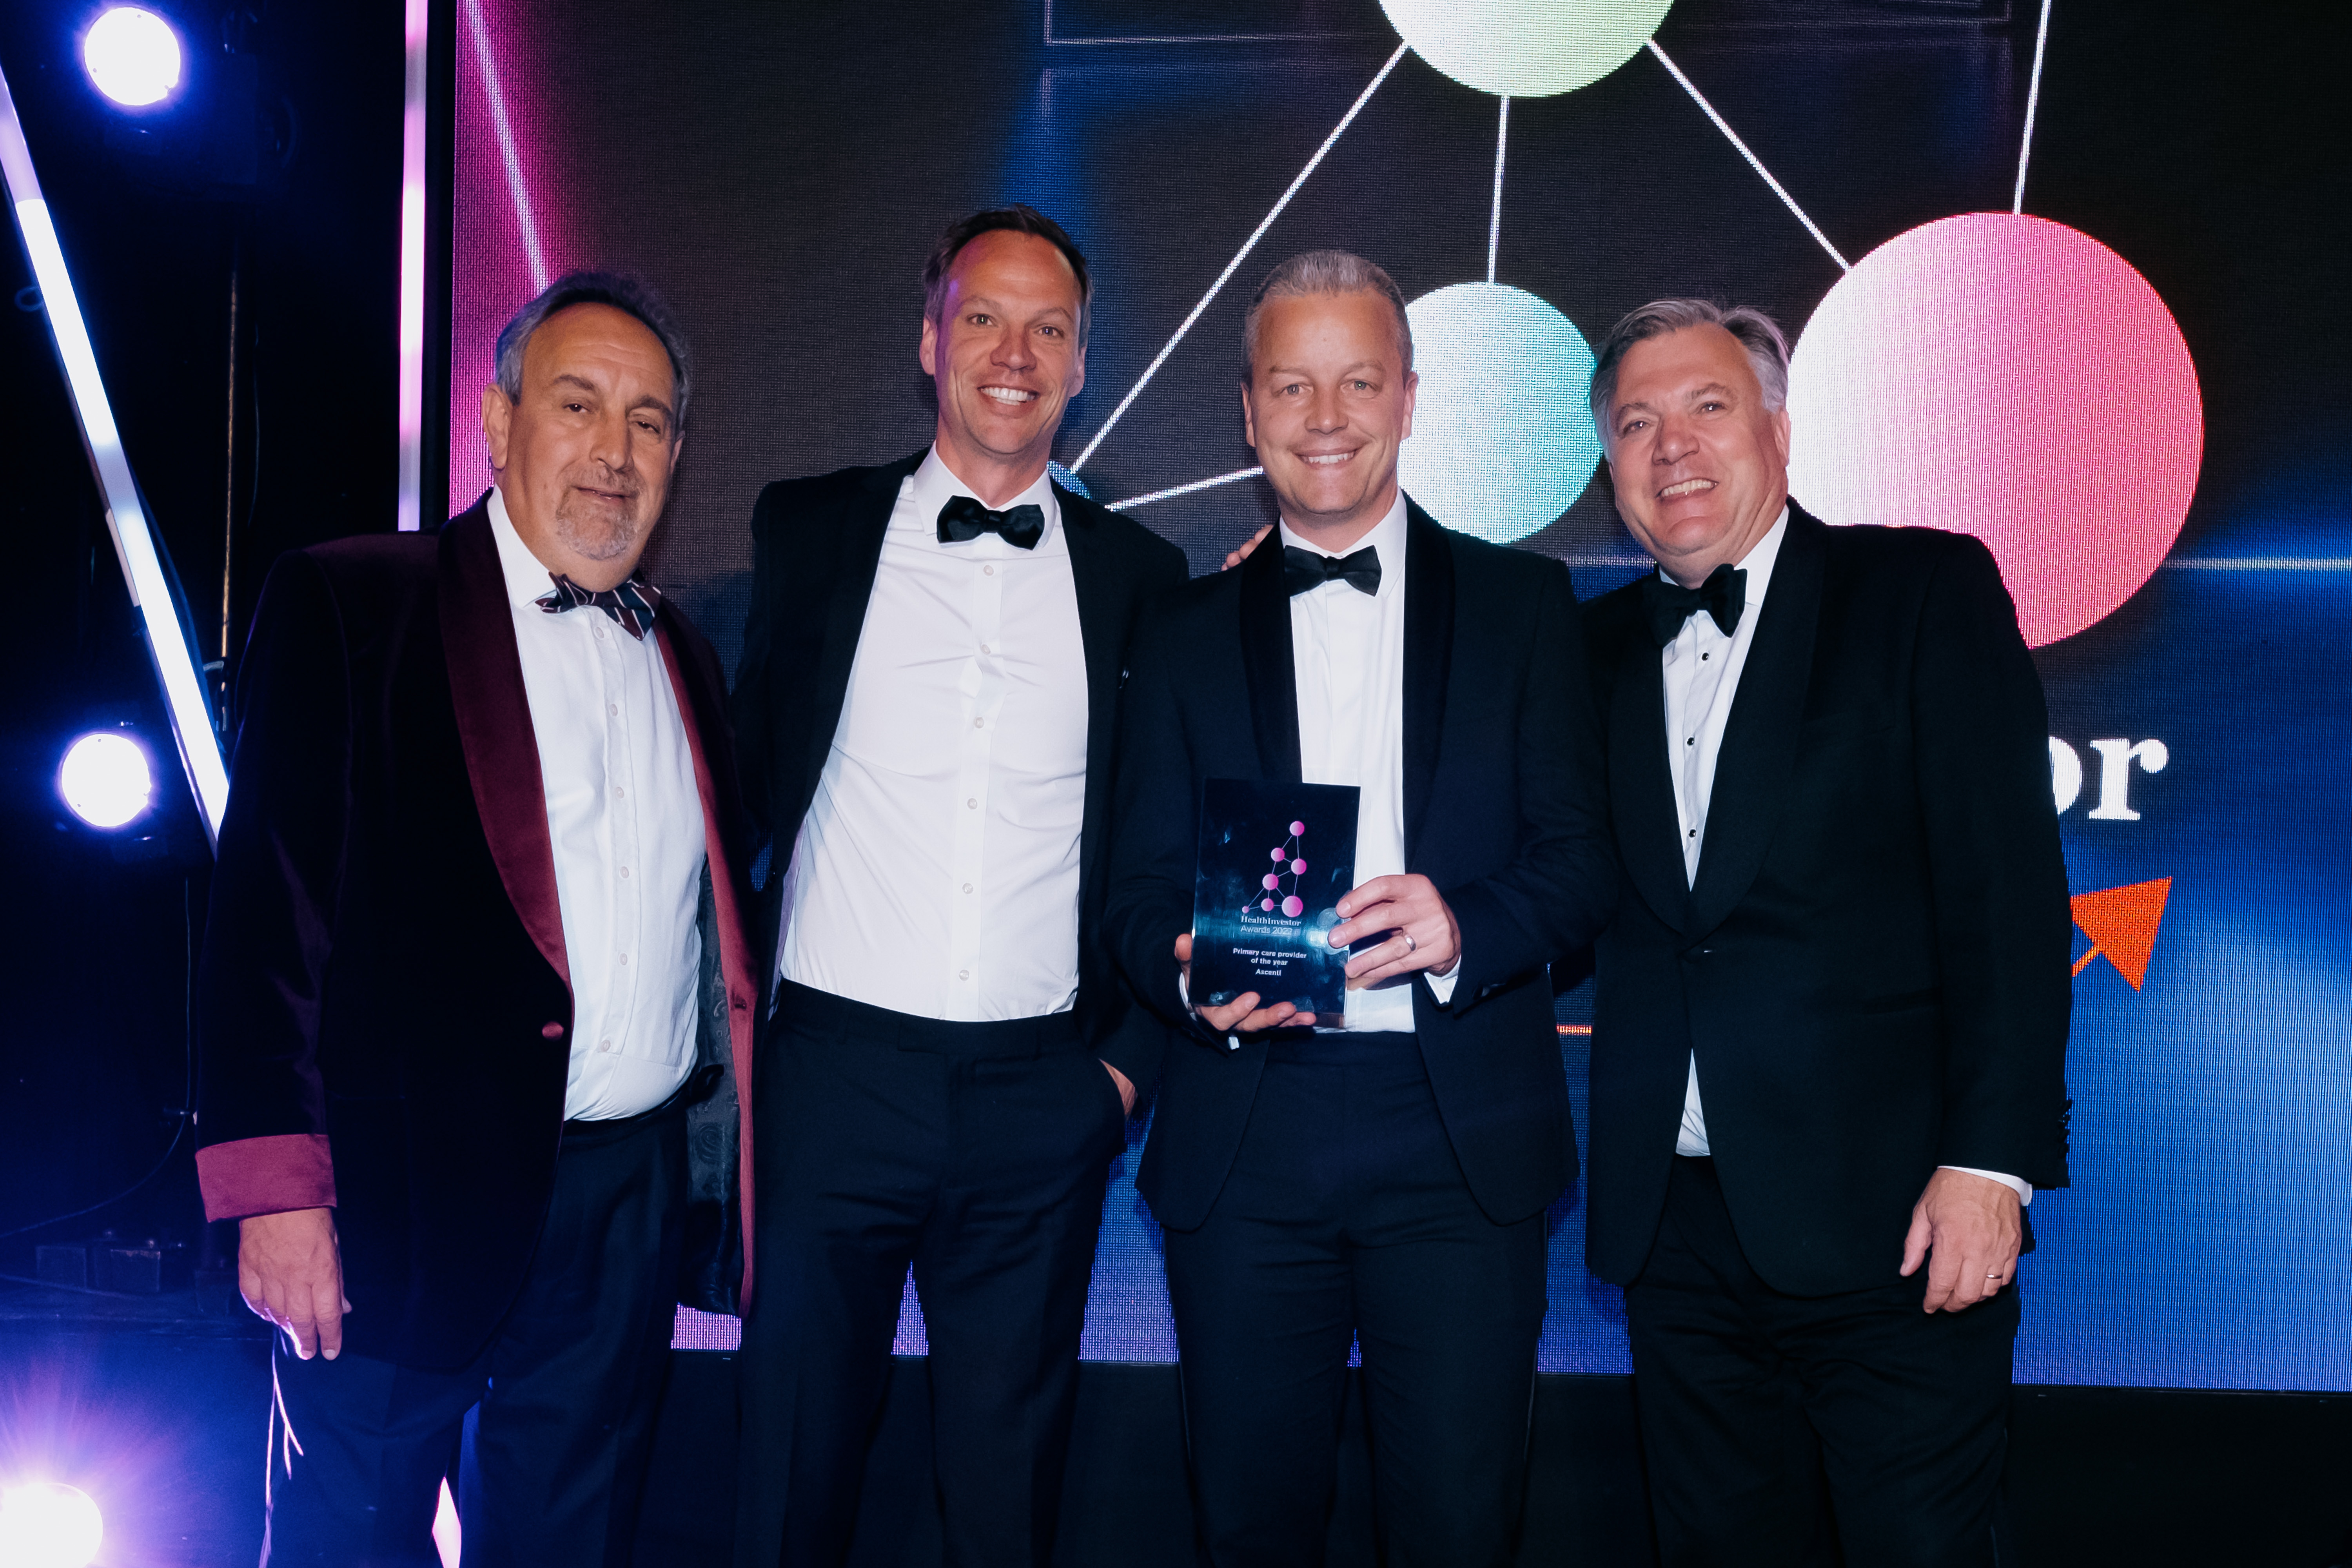 Ascenti’s Director of Strategic Development, Martin Fidock, and Chief Commercial Officer, Kevin Doyle, with last year’s HealthInvestor Awards presenters